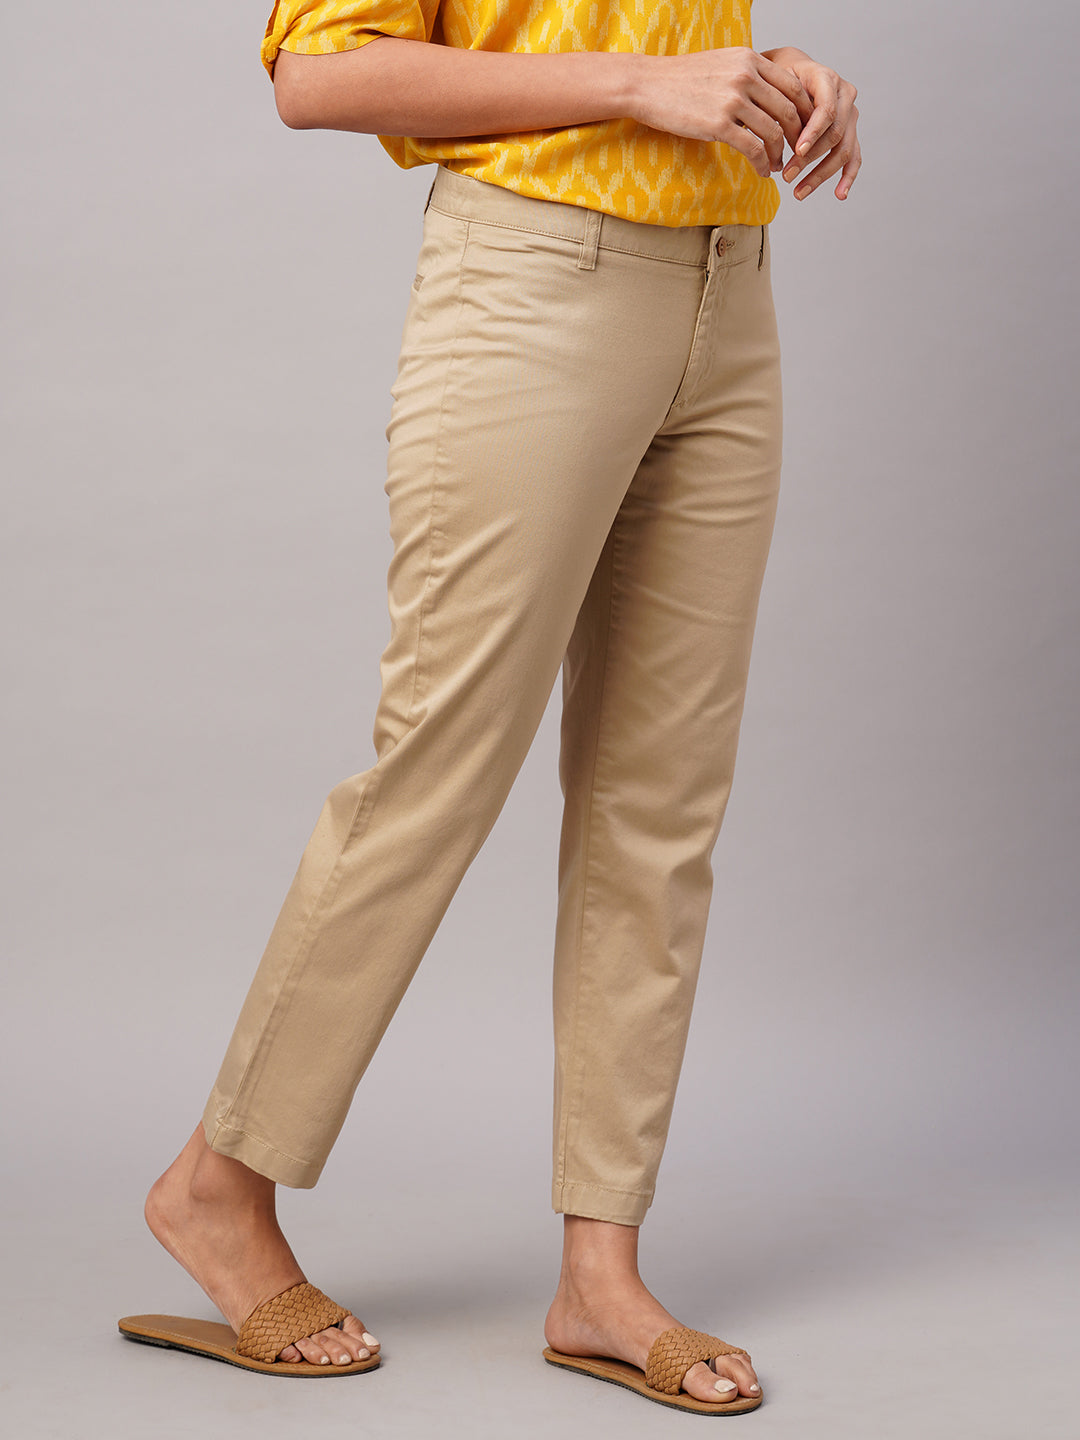 Buy Olive Ankle-Length Trousers Online - RK India Store View